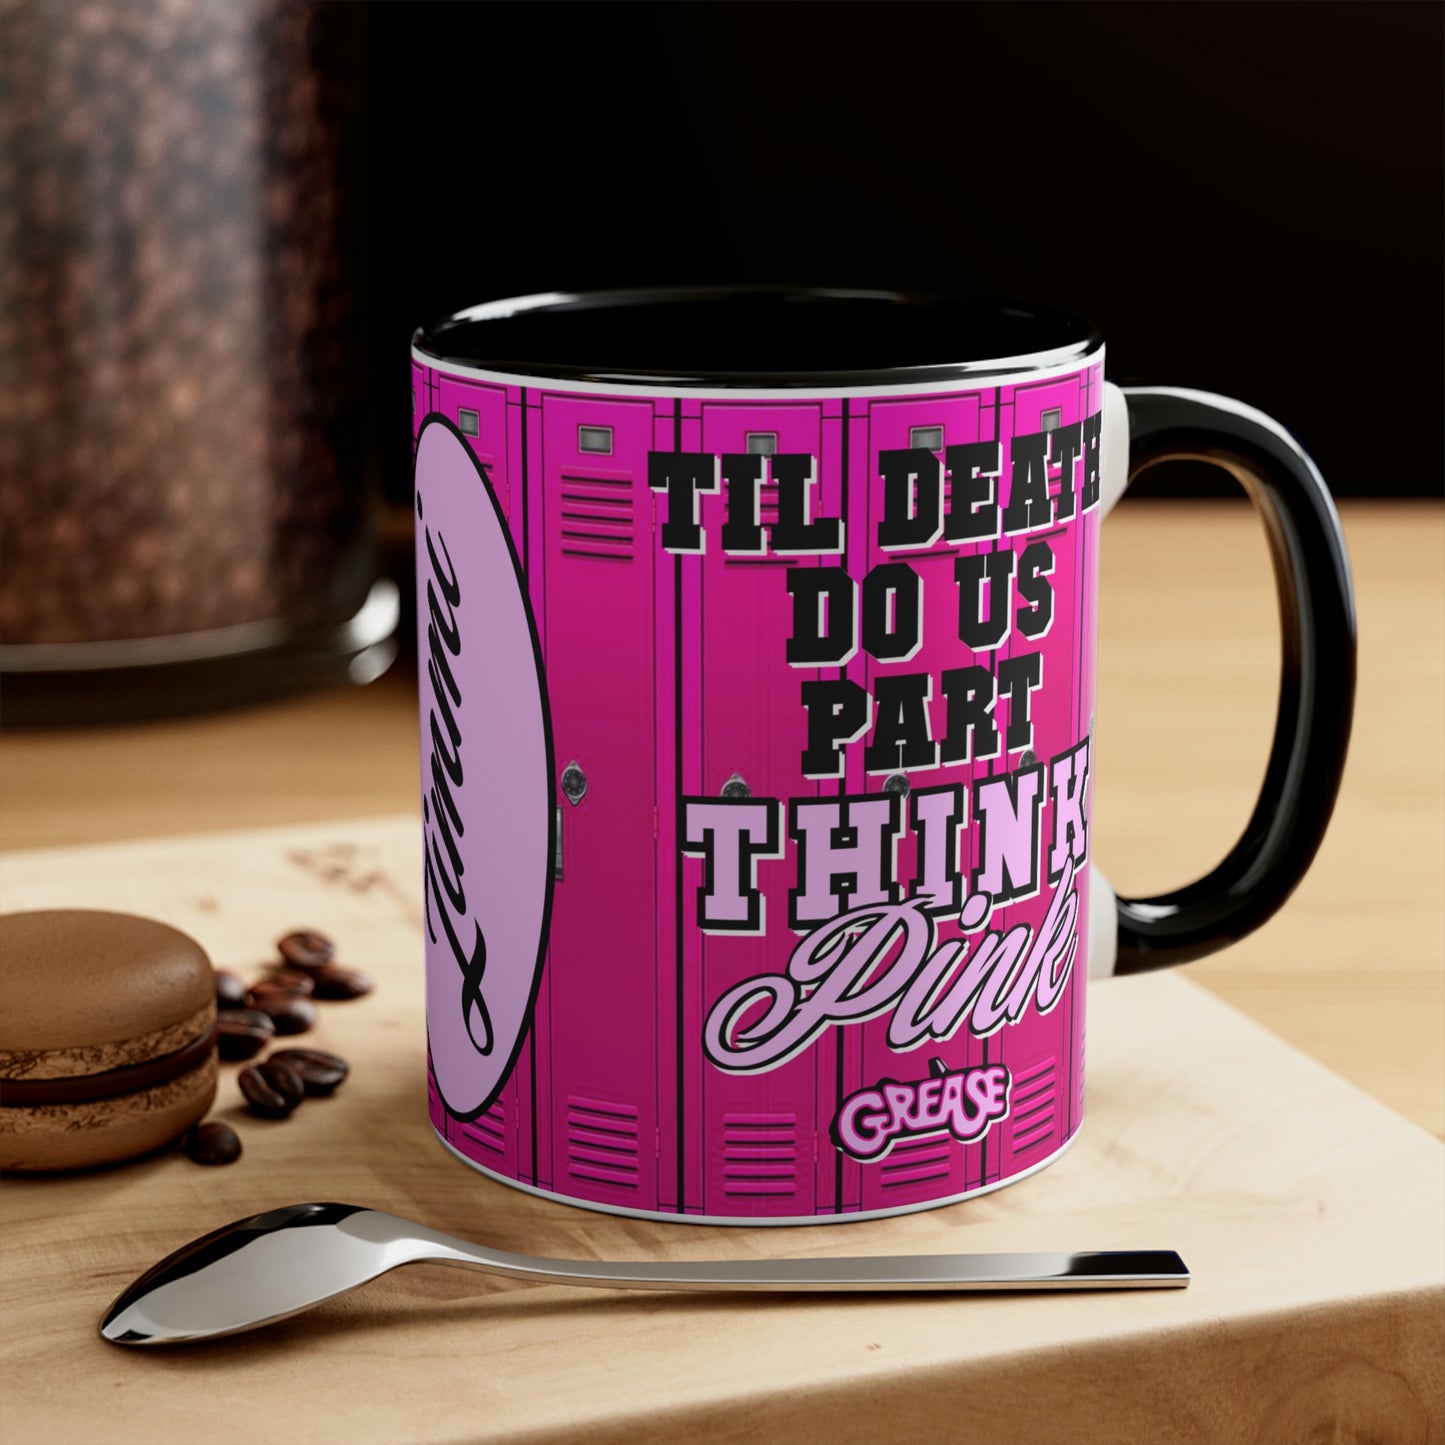 Grease Pink Ladies Pledge Personalized  Mug for Coffee or Tea